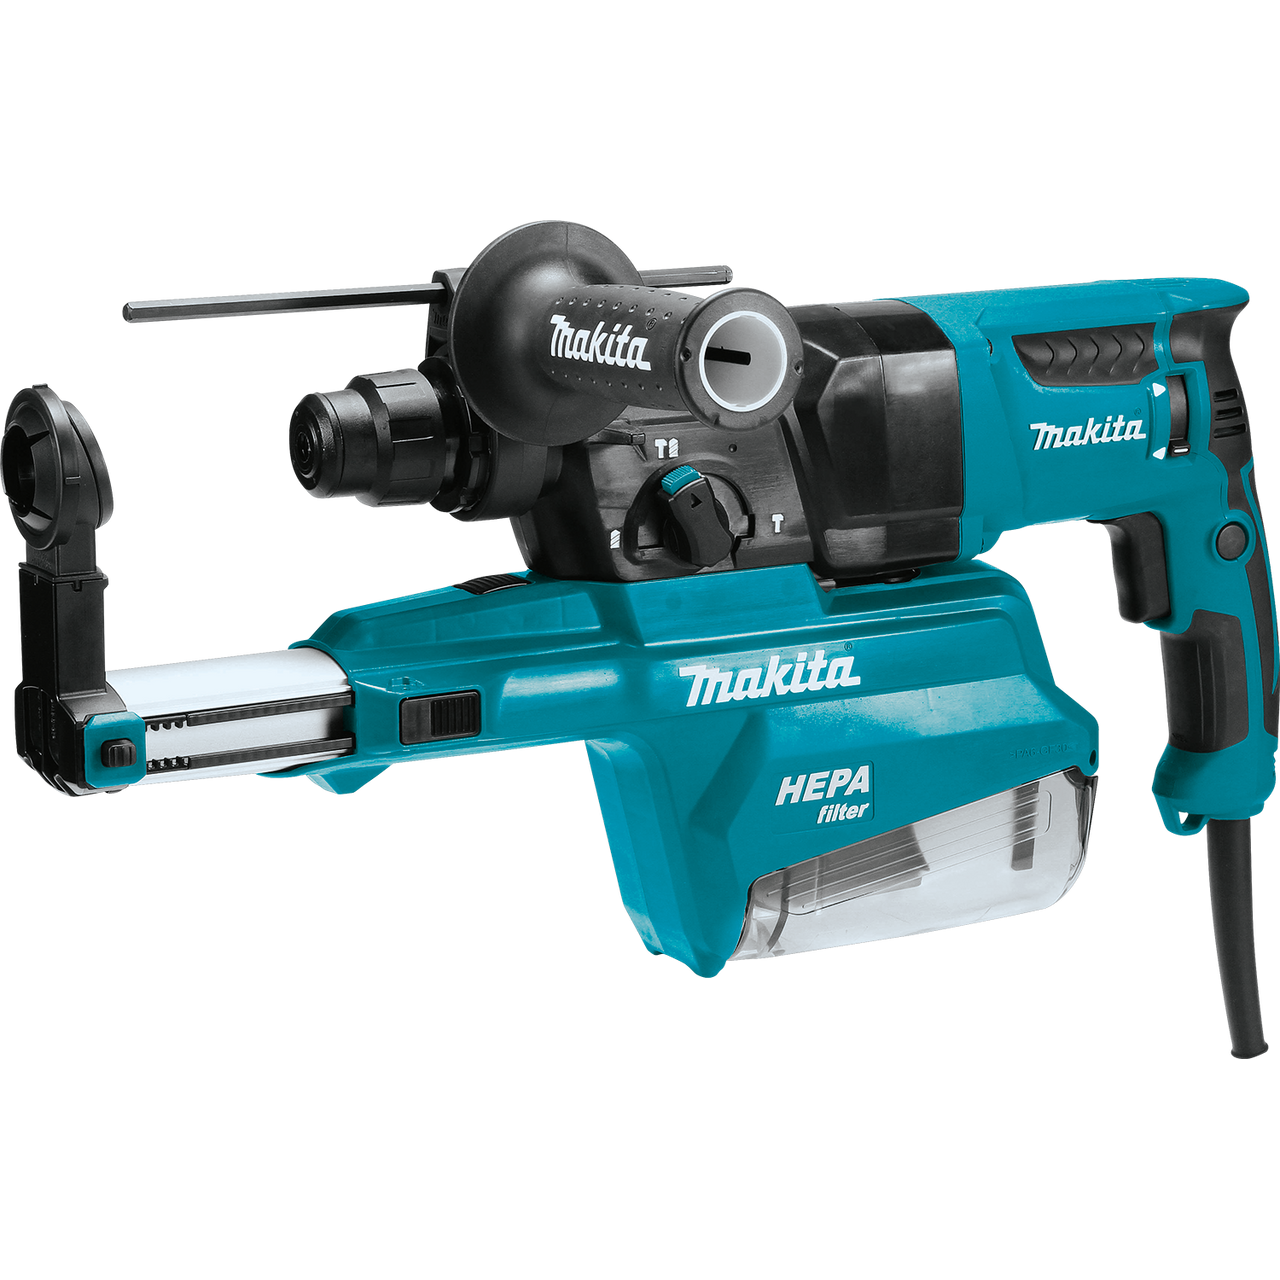 1" AVT? Rotary Hammer, accepts SDS-PLUS bits, w/ HEPA Dust Extractor (Pistol-grip), HR2651